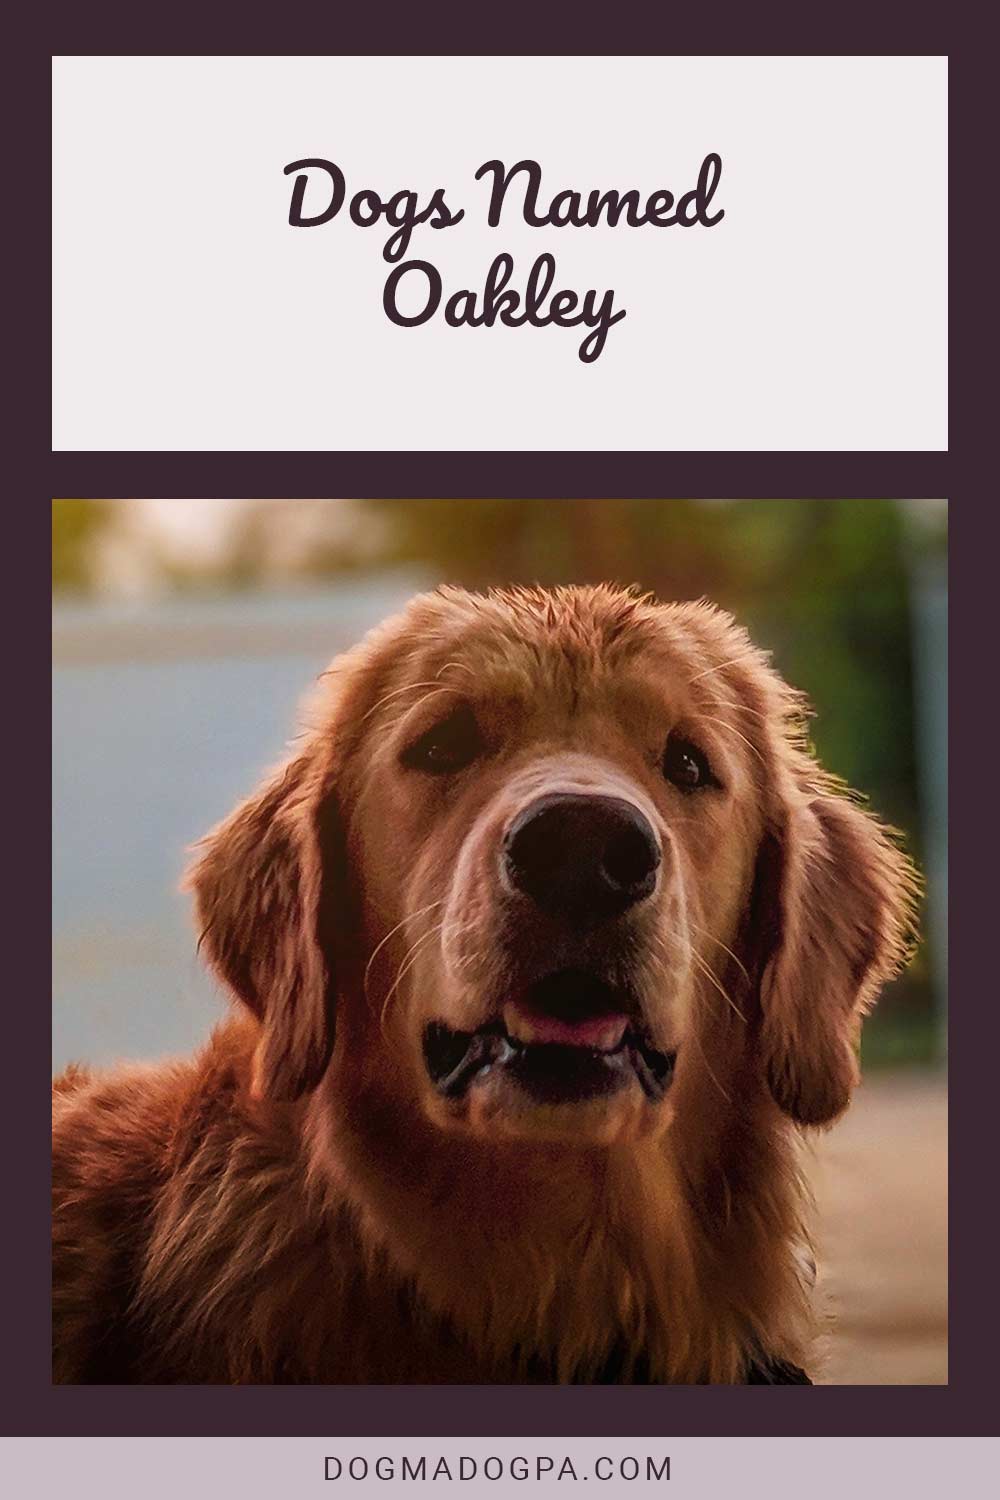 Close up of a Golden Retriever's face - Dogs Named Oakley